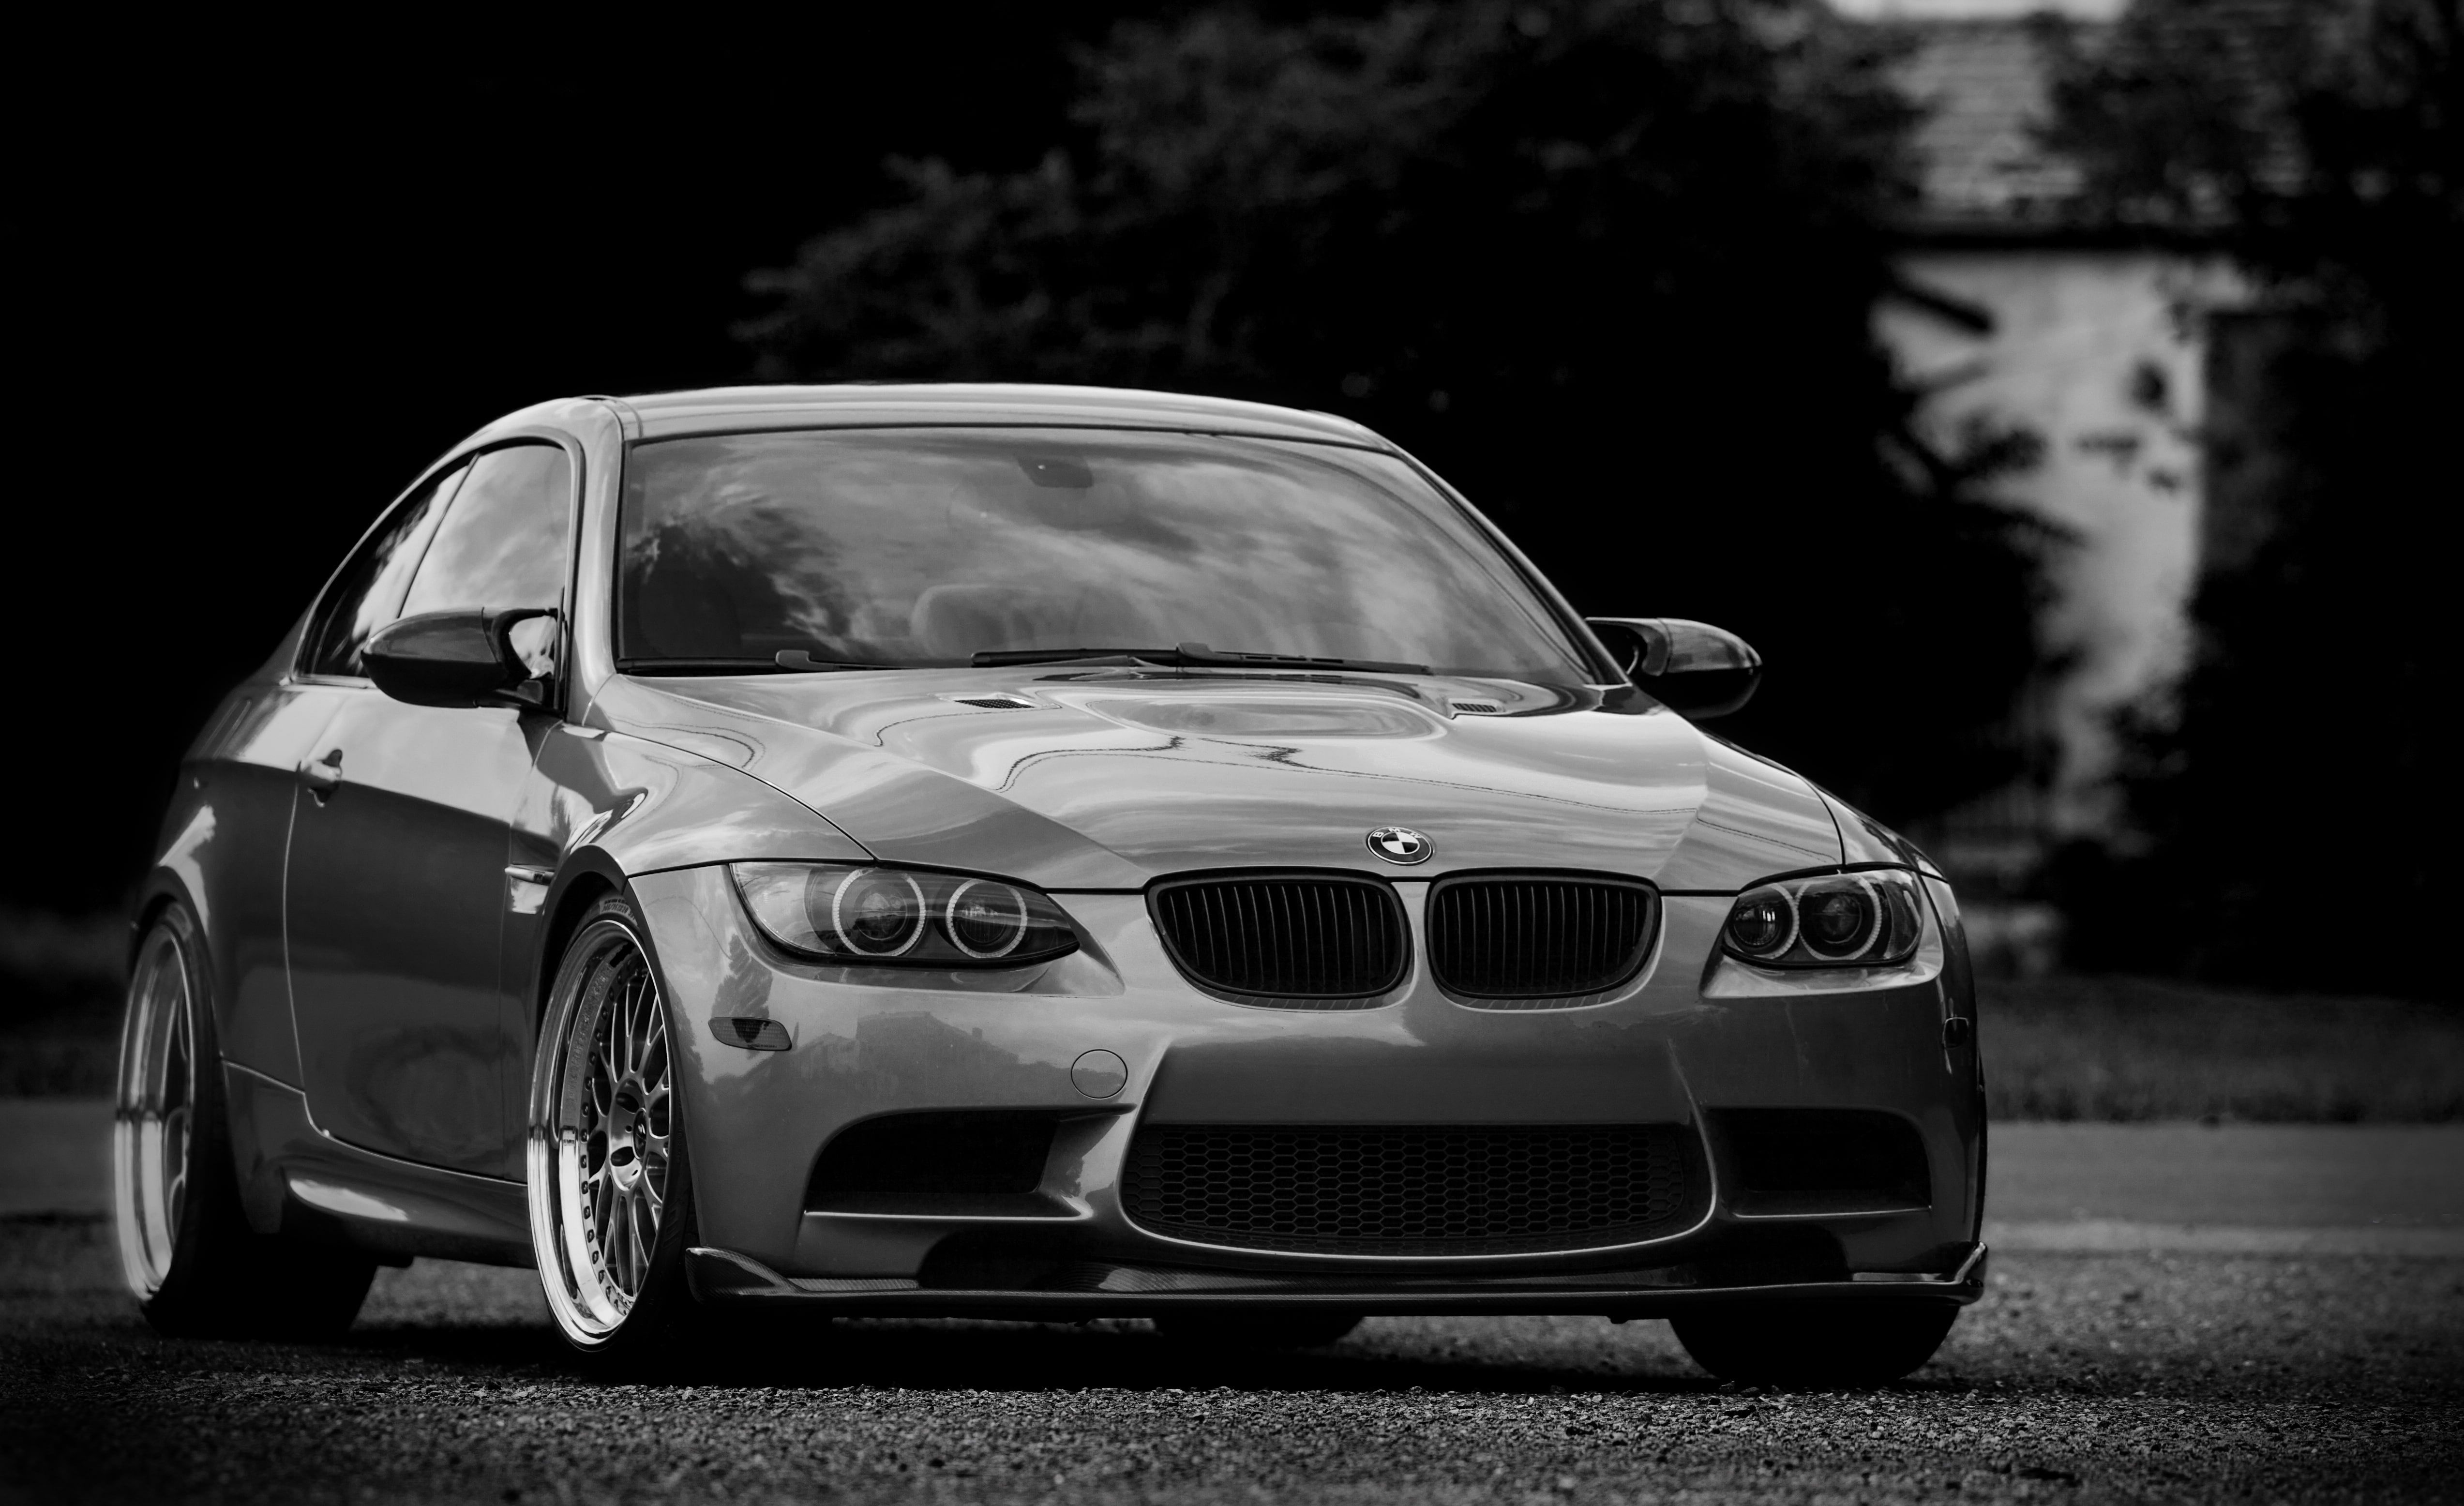 BMW E92 coupe #bmw #BMW #coupe #silver #wheels #drives black and white photo #e92 #silvery #tinted K #wallpaper #hdwallpaper #des. Bmw m3 wallpaper, Bmw, Bmw m3